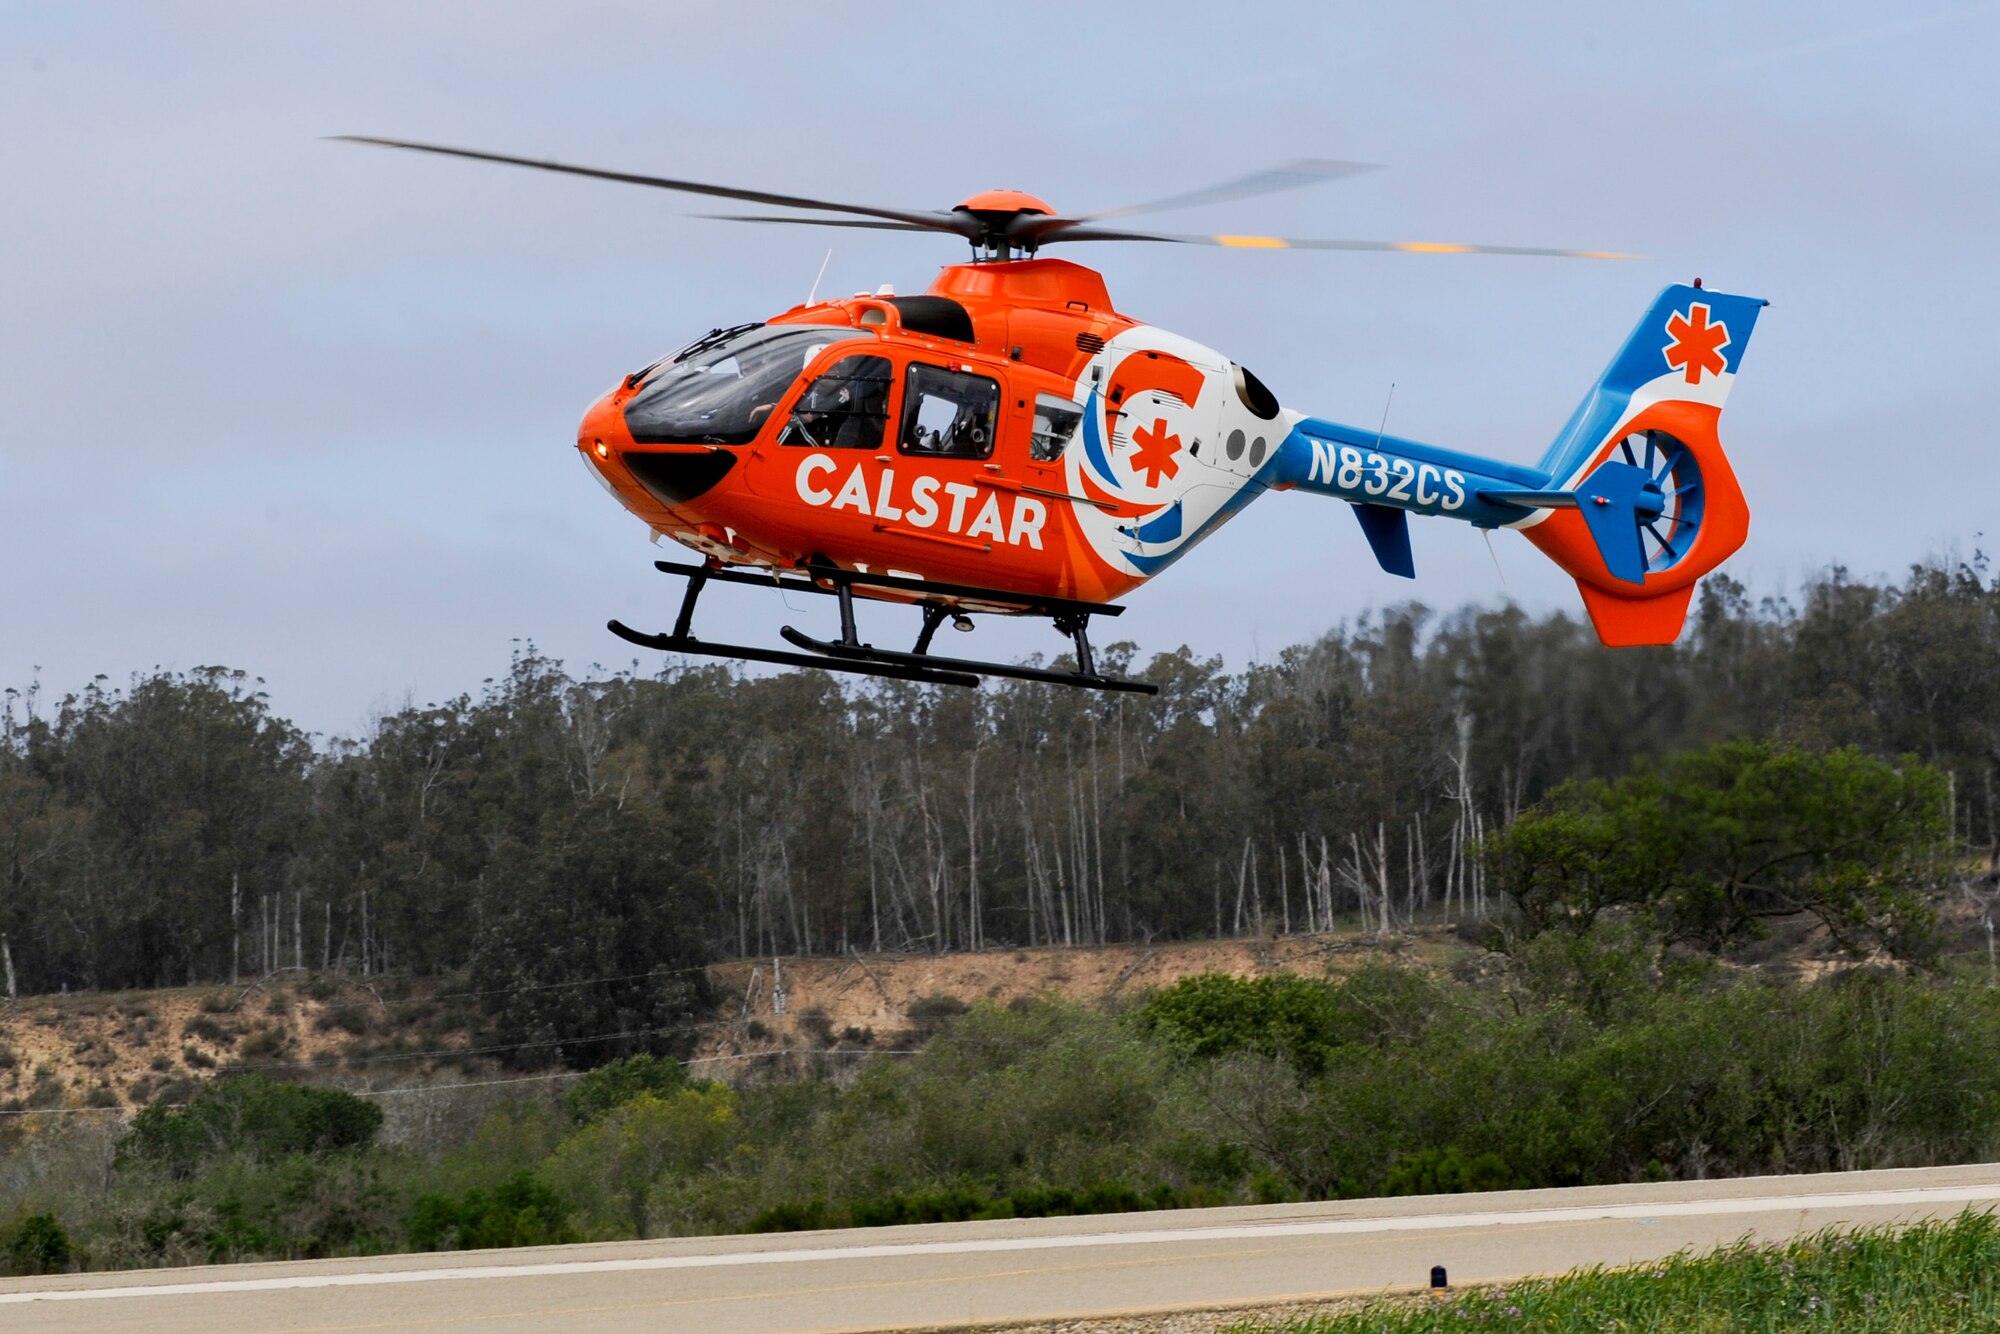 LOMPOC, Calif. – A California Shock Trauma Air Rescue flight crew lands at the Lompoc Airport for training at the Lompoc Airport Thursday, April 11, 2013. Vandenberg Fire Department members trained with the CALStar flight crew to ensure patients can get to a trauma unit within the 60 minute window known as the golden hour. (U.S. Air Force photo/Airman Yvonne Morales)